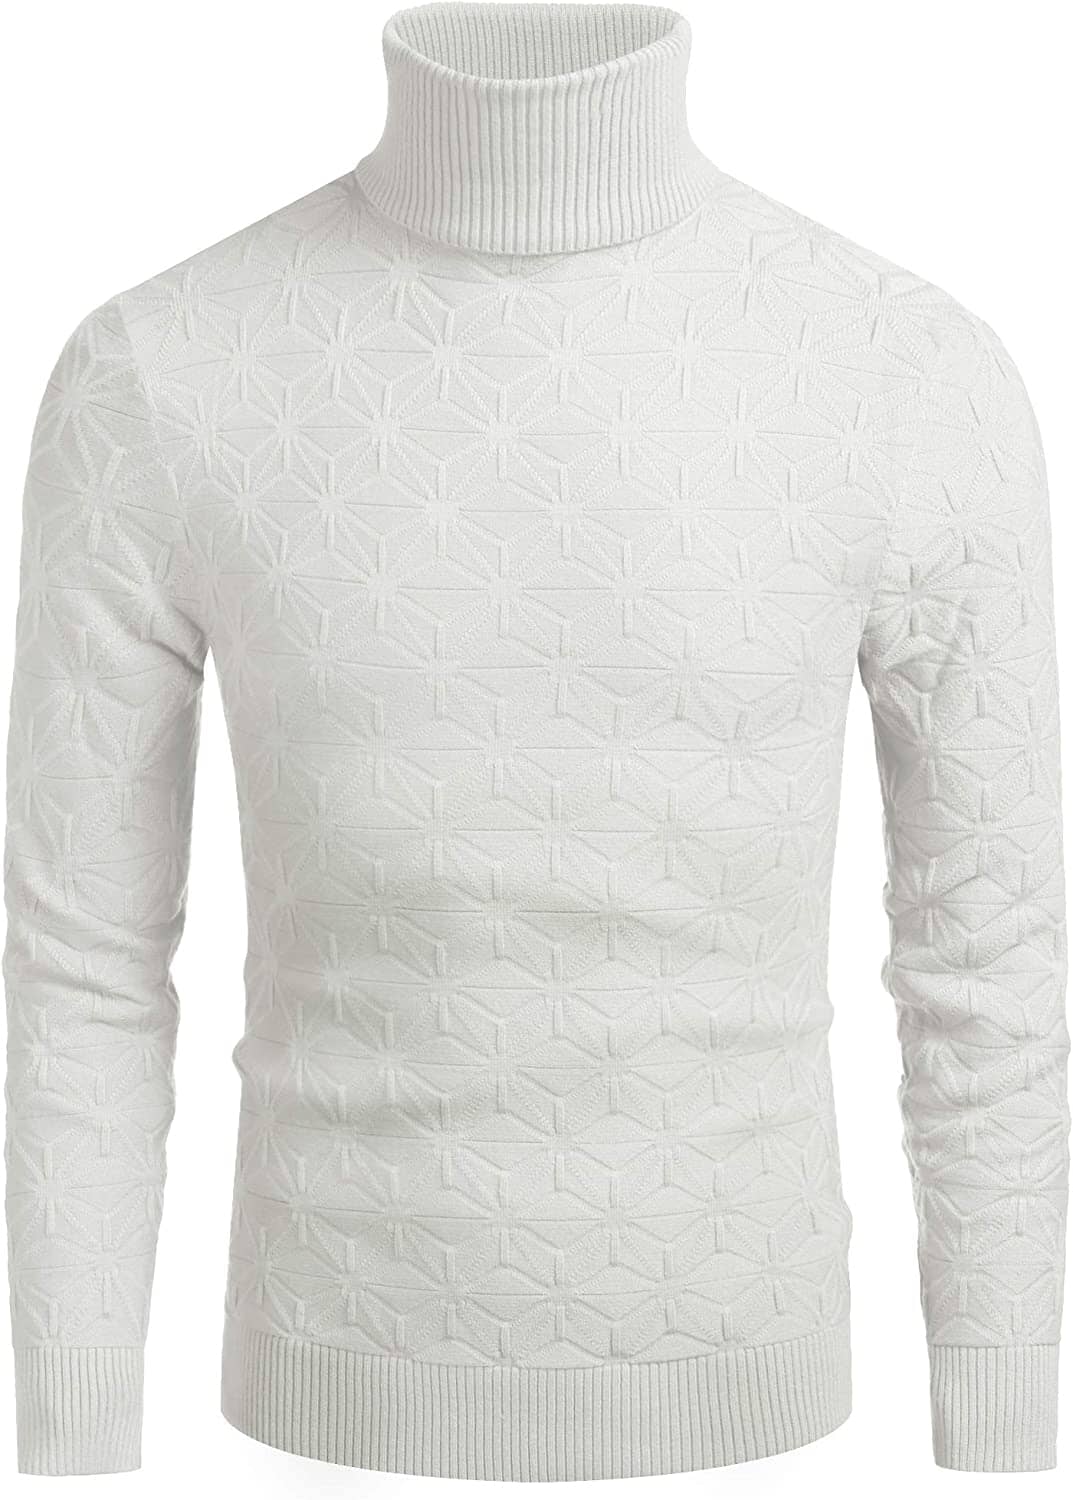 Stylish Slim Fit Turtleneck Pullover Sweater (US Only) Sweaters COOFANDY Store 